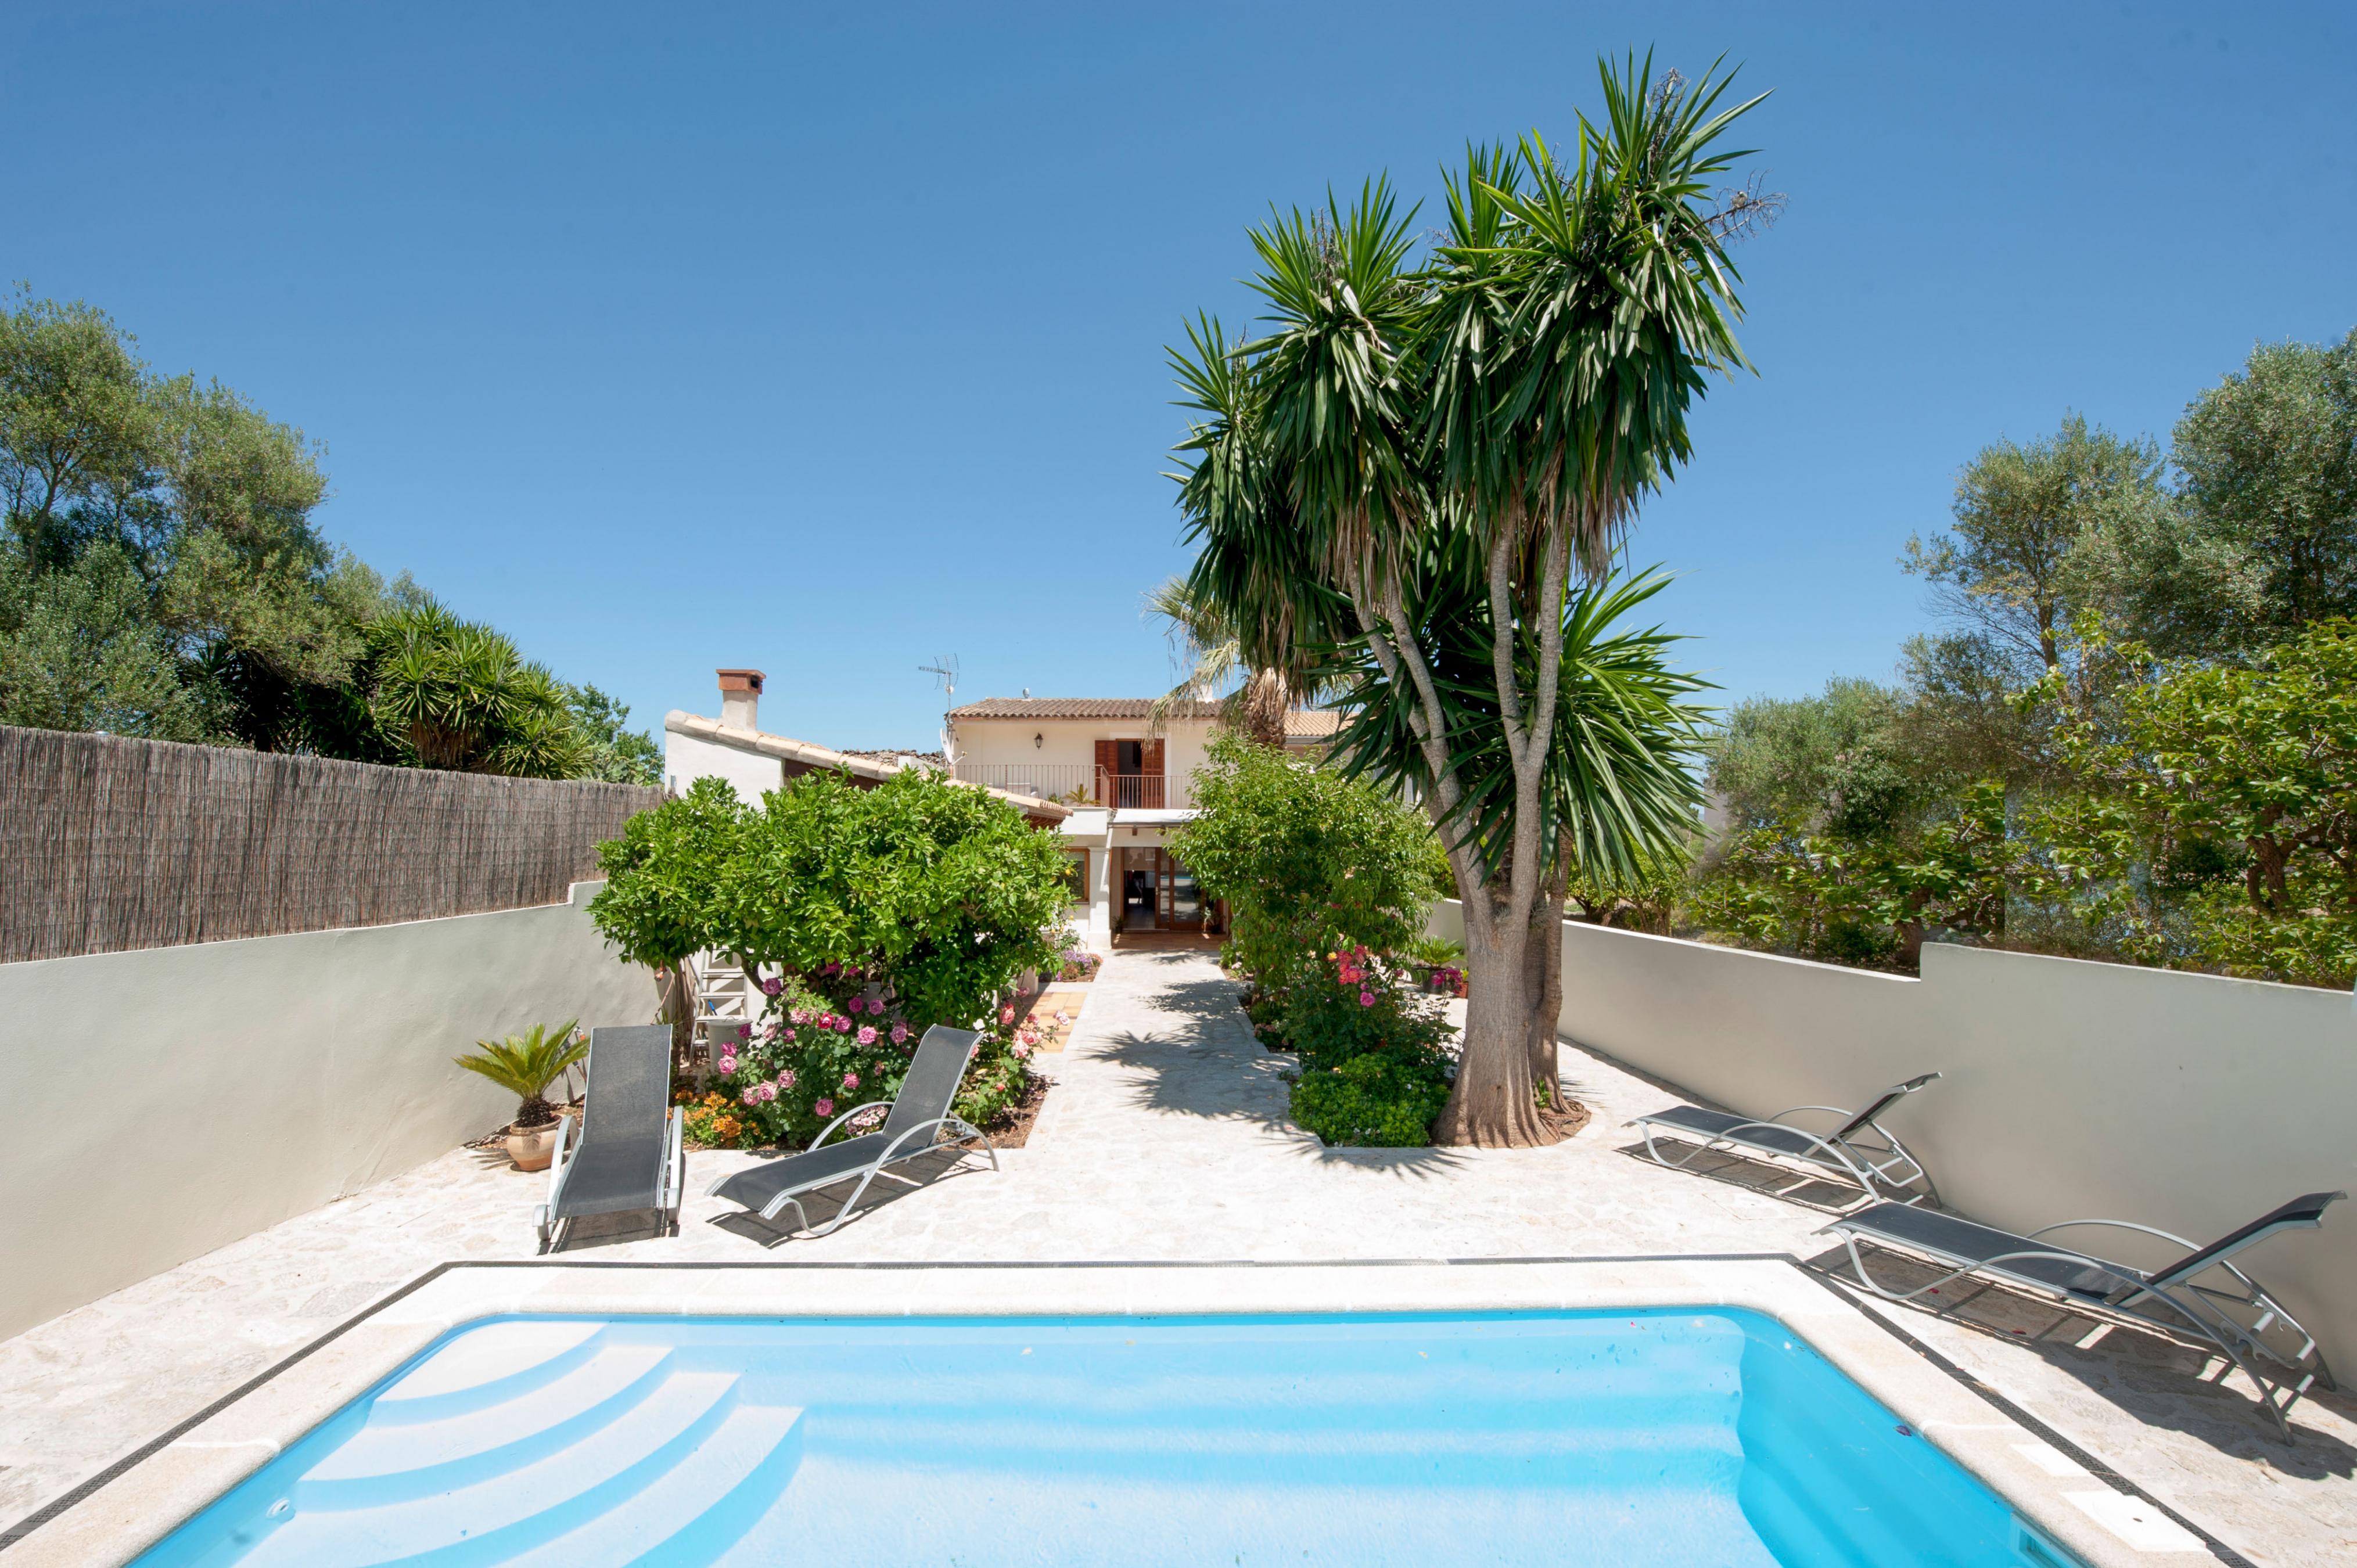 Property Image 1 - WOODHOUSE - Beautiful townhouse with private pool, porch with BBQ and wonderful terrace. Free WiFi